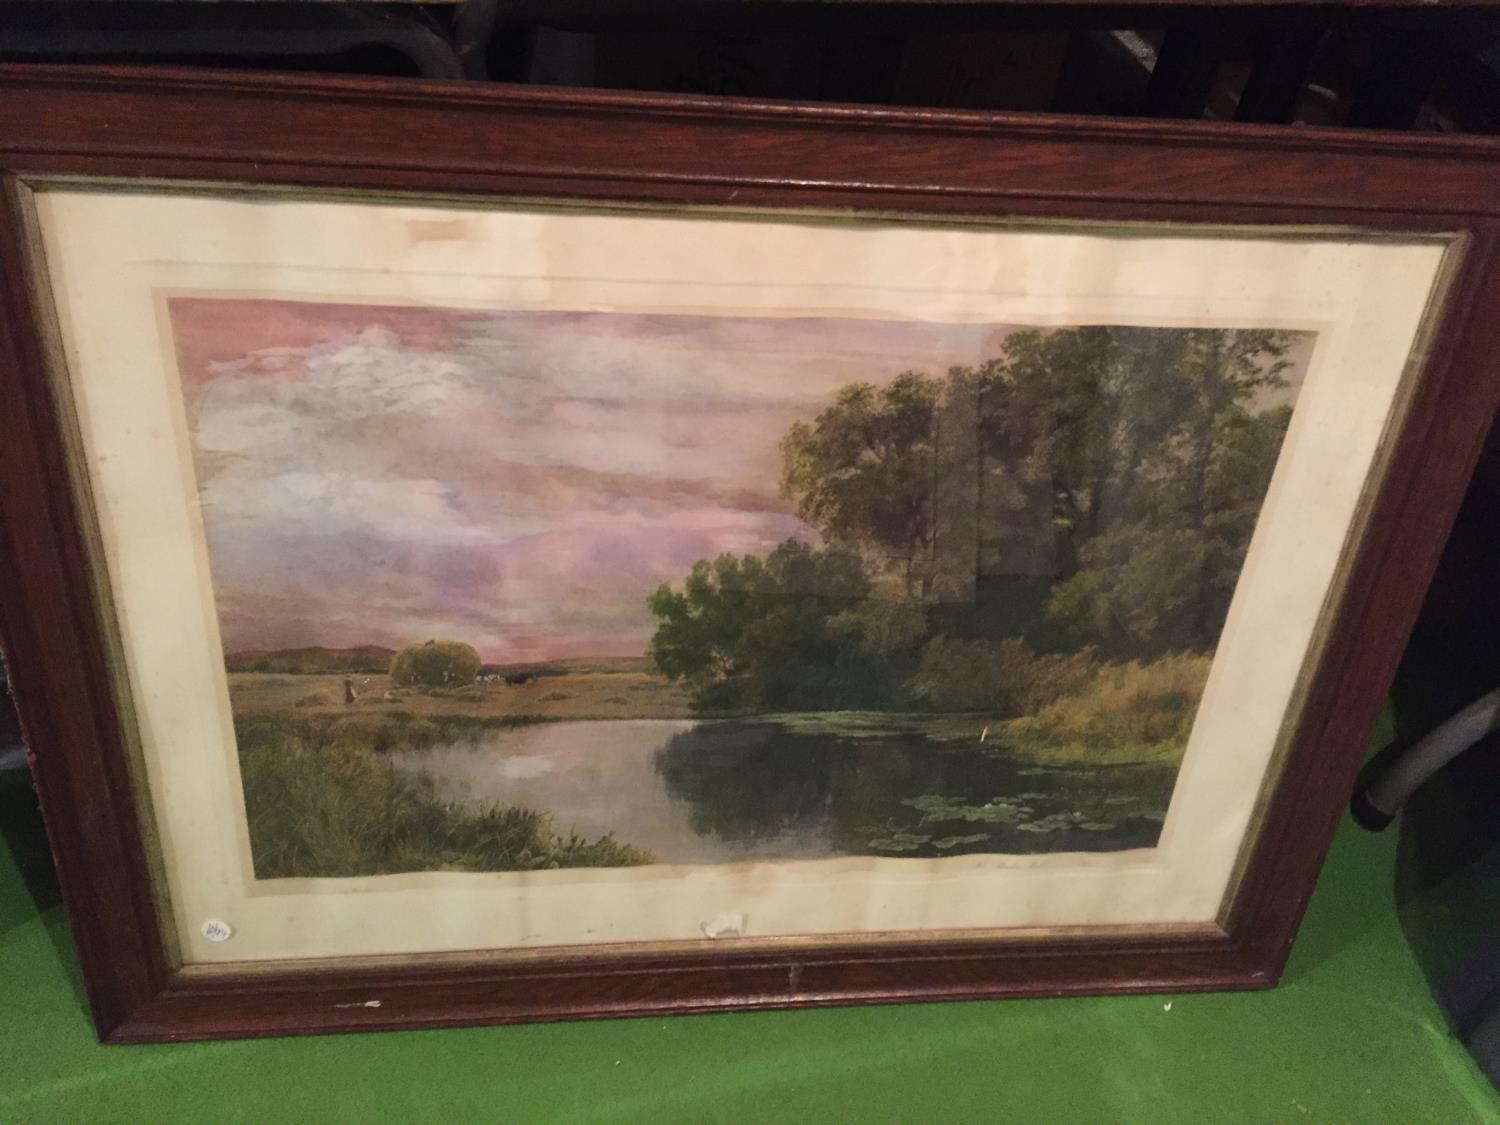 A LARGE FRAMED PRINT OF THE MEADOW POOL